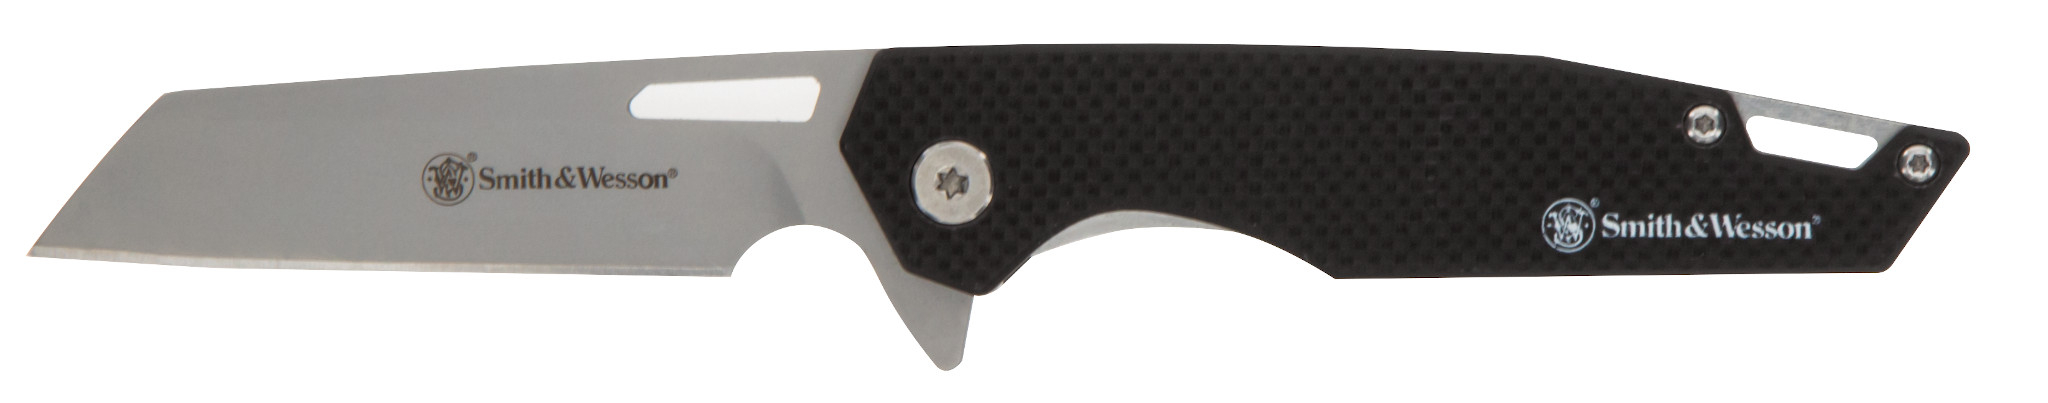 American Outdoor Brands - Sideburn Folding Knife CP=3 -  1117235